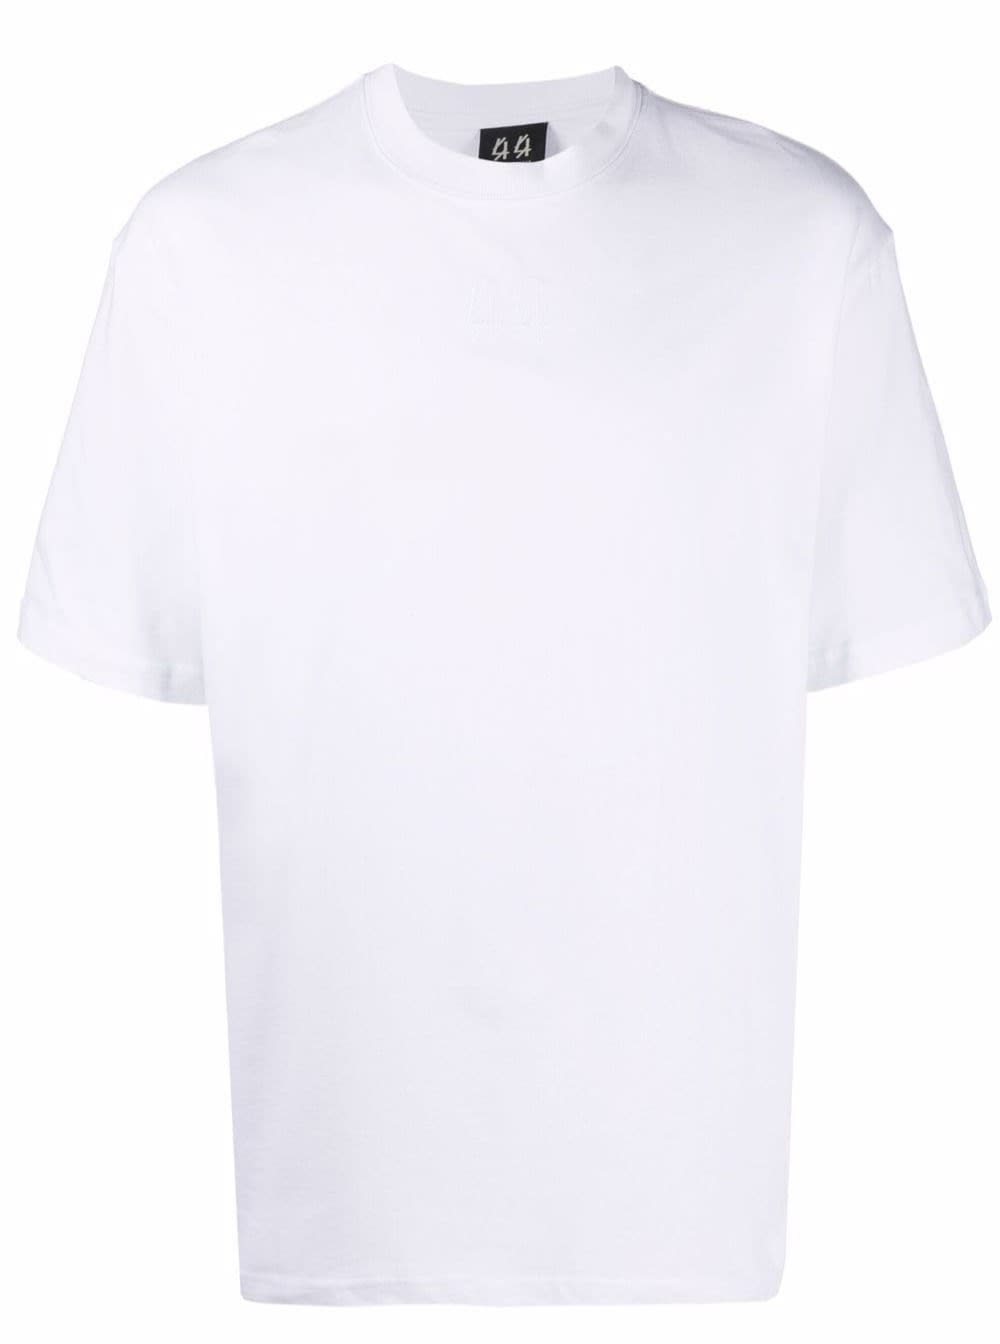 44 Label Group Chaos White T-shirt